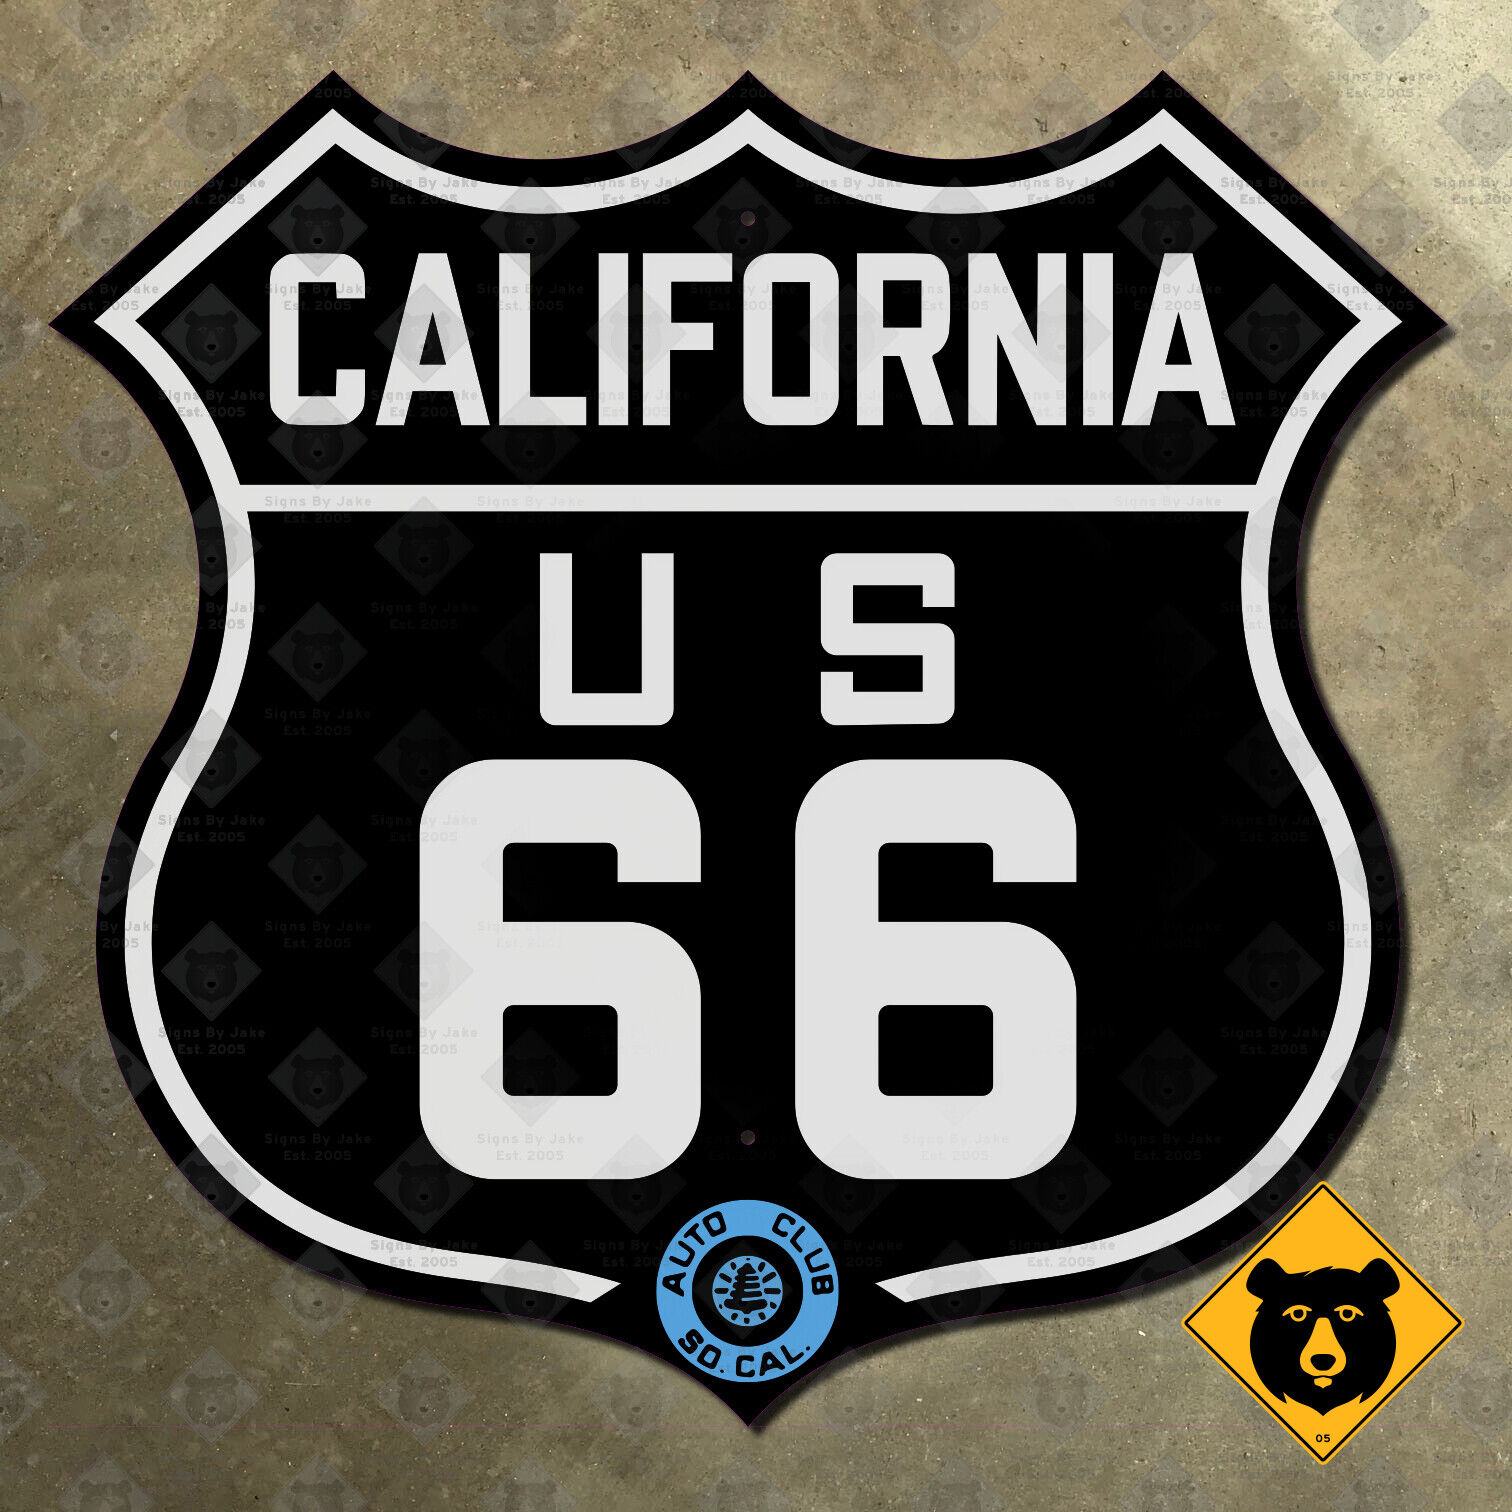 California US route 66 marker 1928 ACSC mother road auto club sign black 16x15